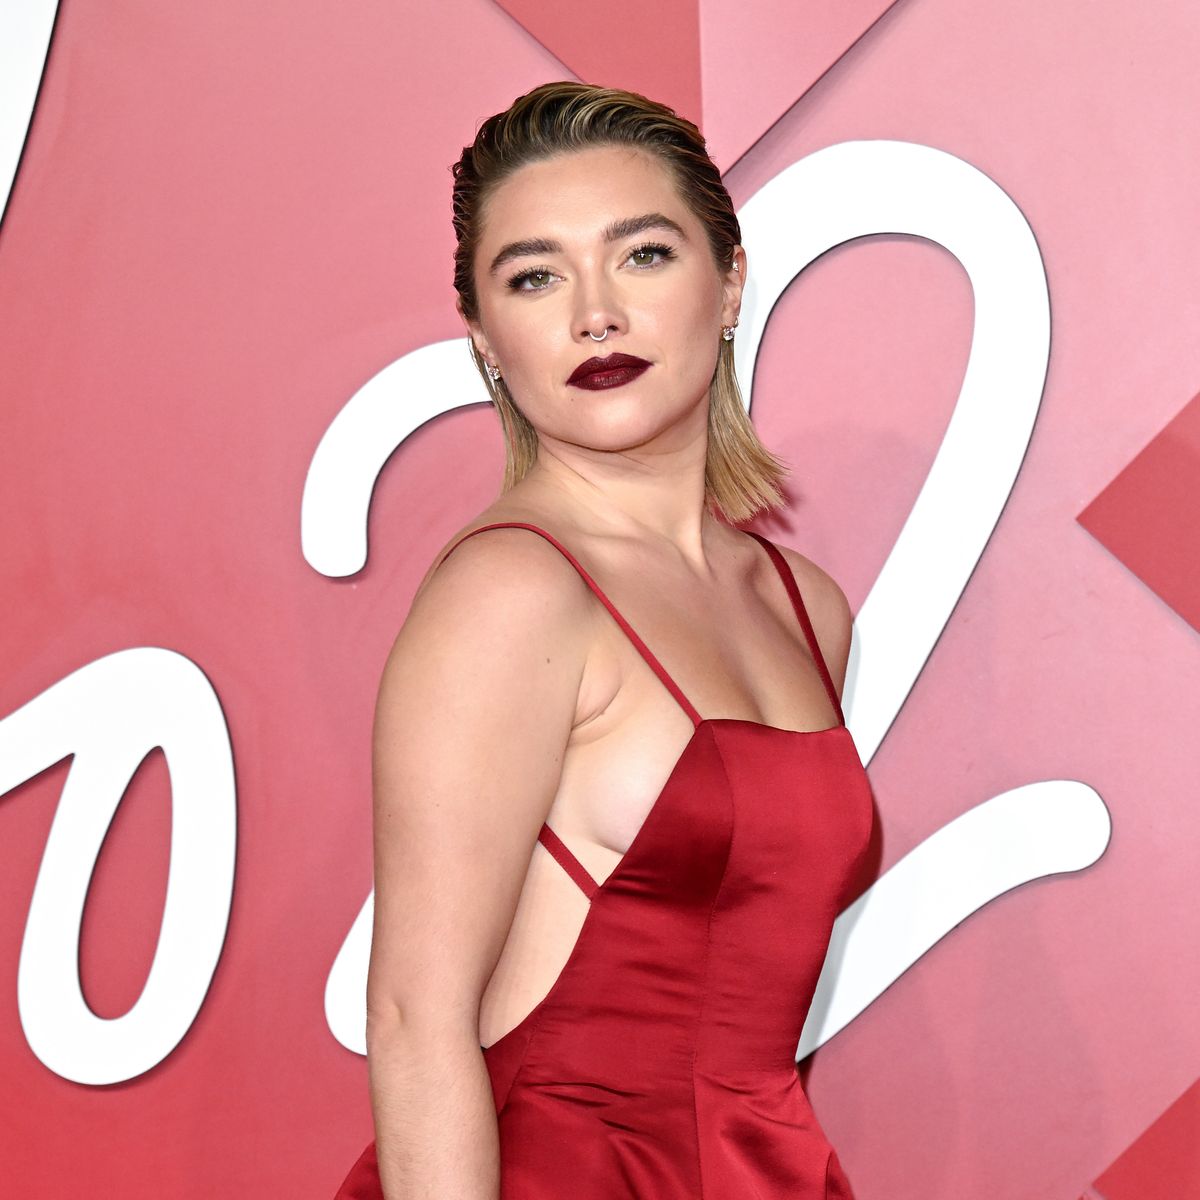 Ebony Girl Small Nipples - Florence Pugh wears a see-through dress to 'free the nipple'